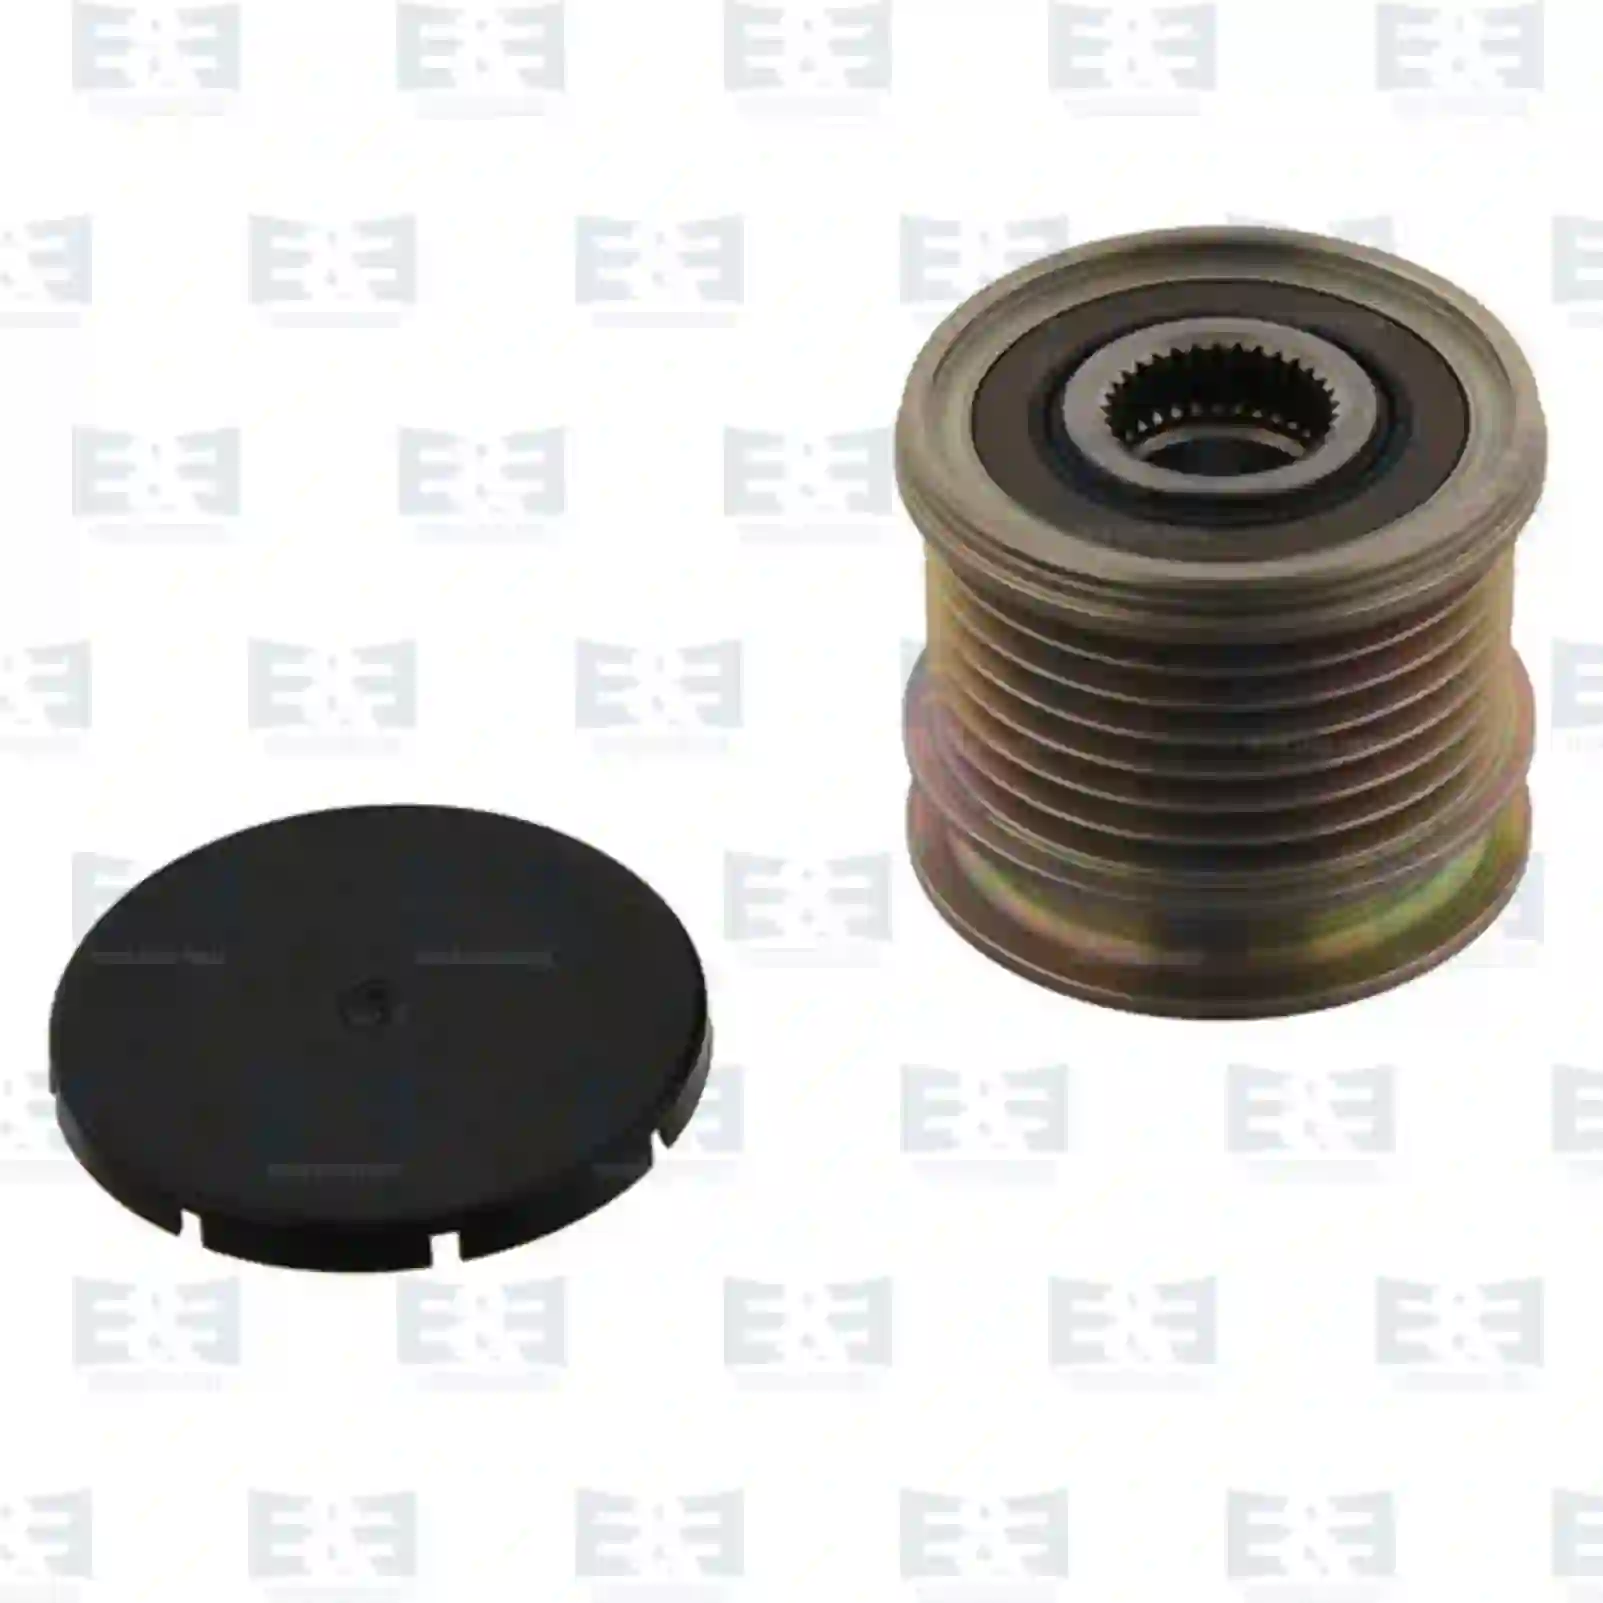 Pulley, Alternator Pulley, alternator, EE No 2E2290197 ,  oem no:4896808AA, 4896808AB, 4896808AC, 5175765AA, 5175765AB, 5175811AA, 5175811AB, RX801250AD, 5175811AA, 5175811AB, 353741, 5175811AA, 5175811AB, 6261500060, 6421500360, 6421500660 E&E Truck Spare Parts | Truck Spare Parts, Auotomotive Spare Parts